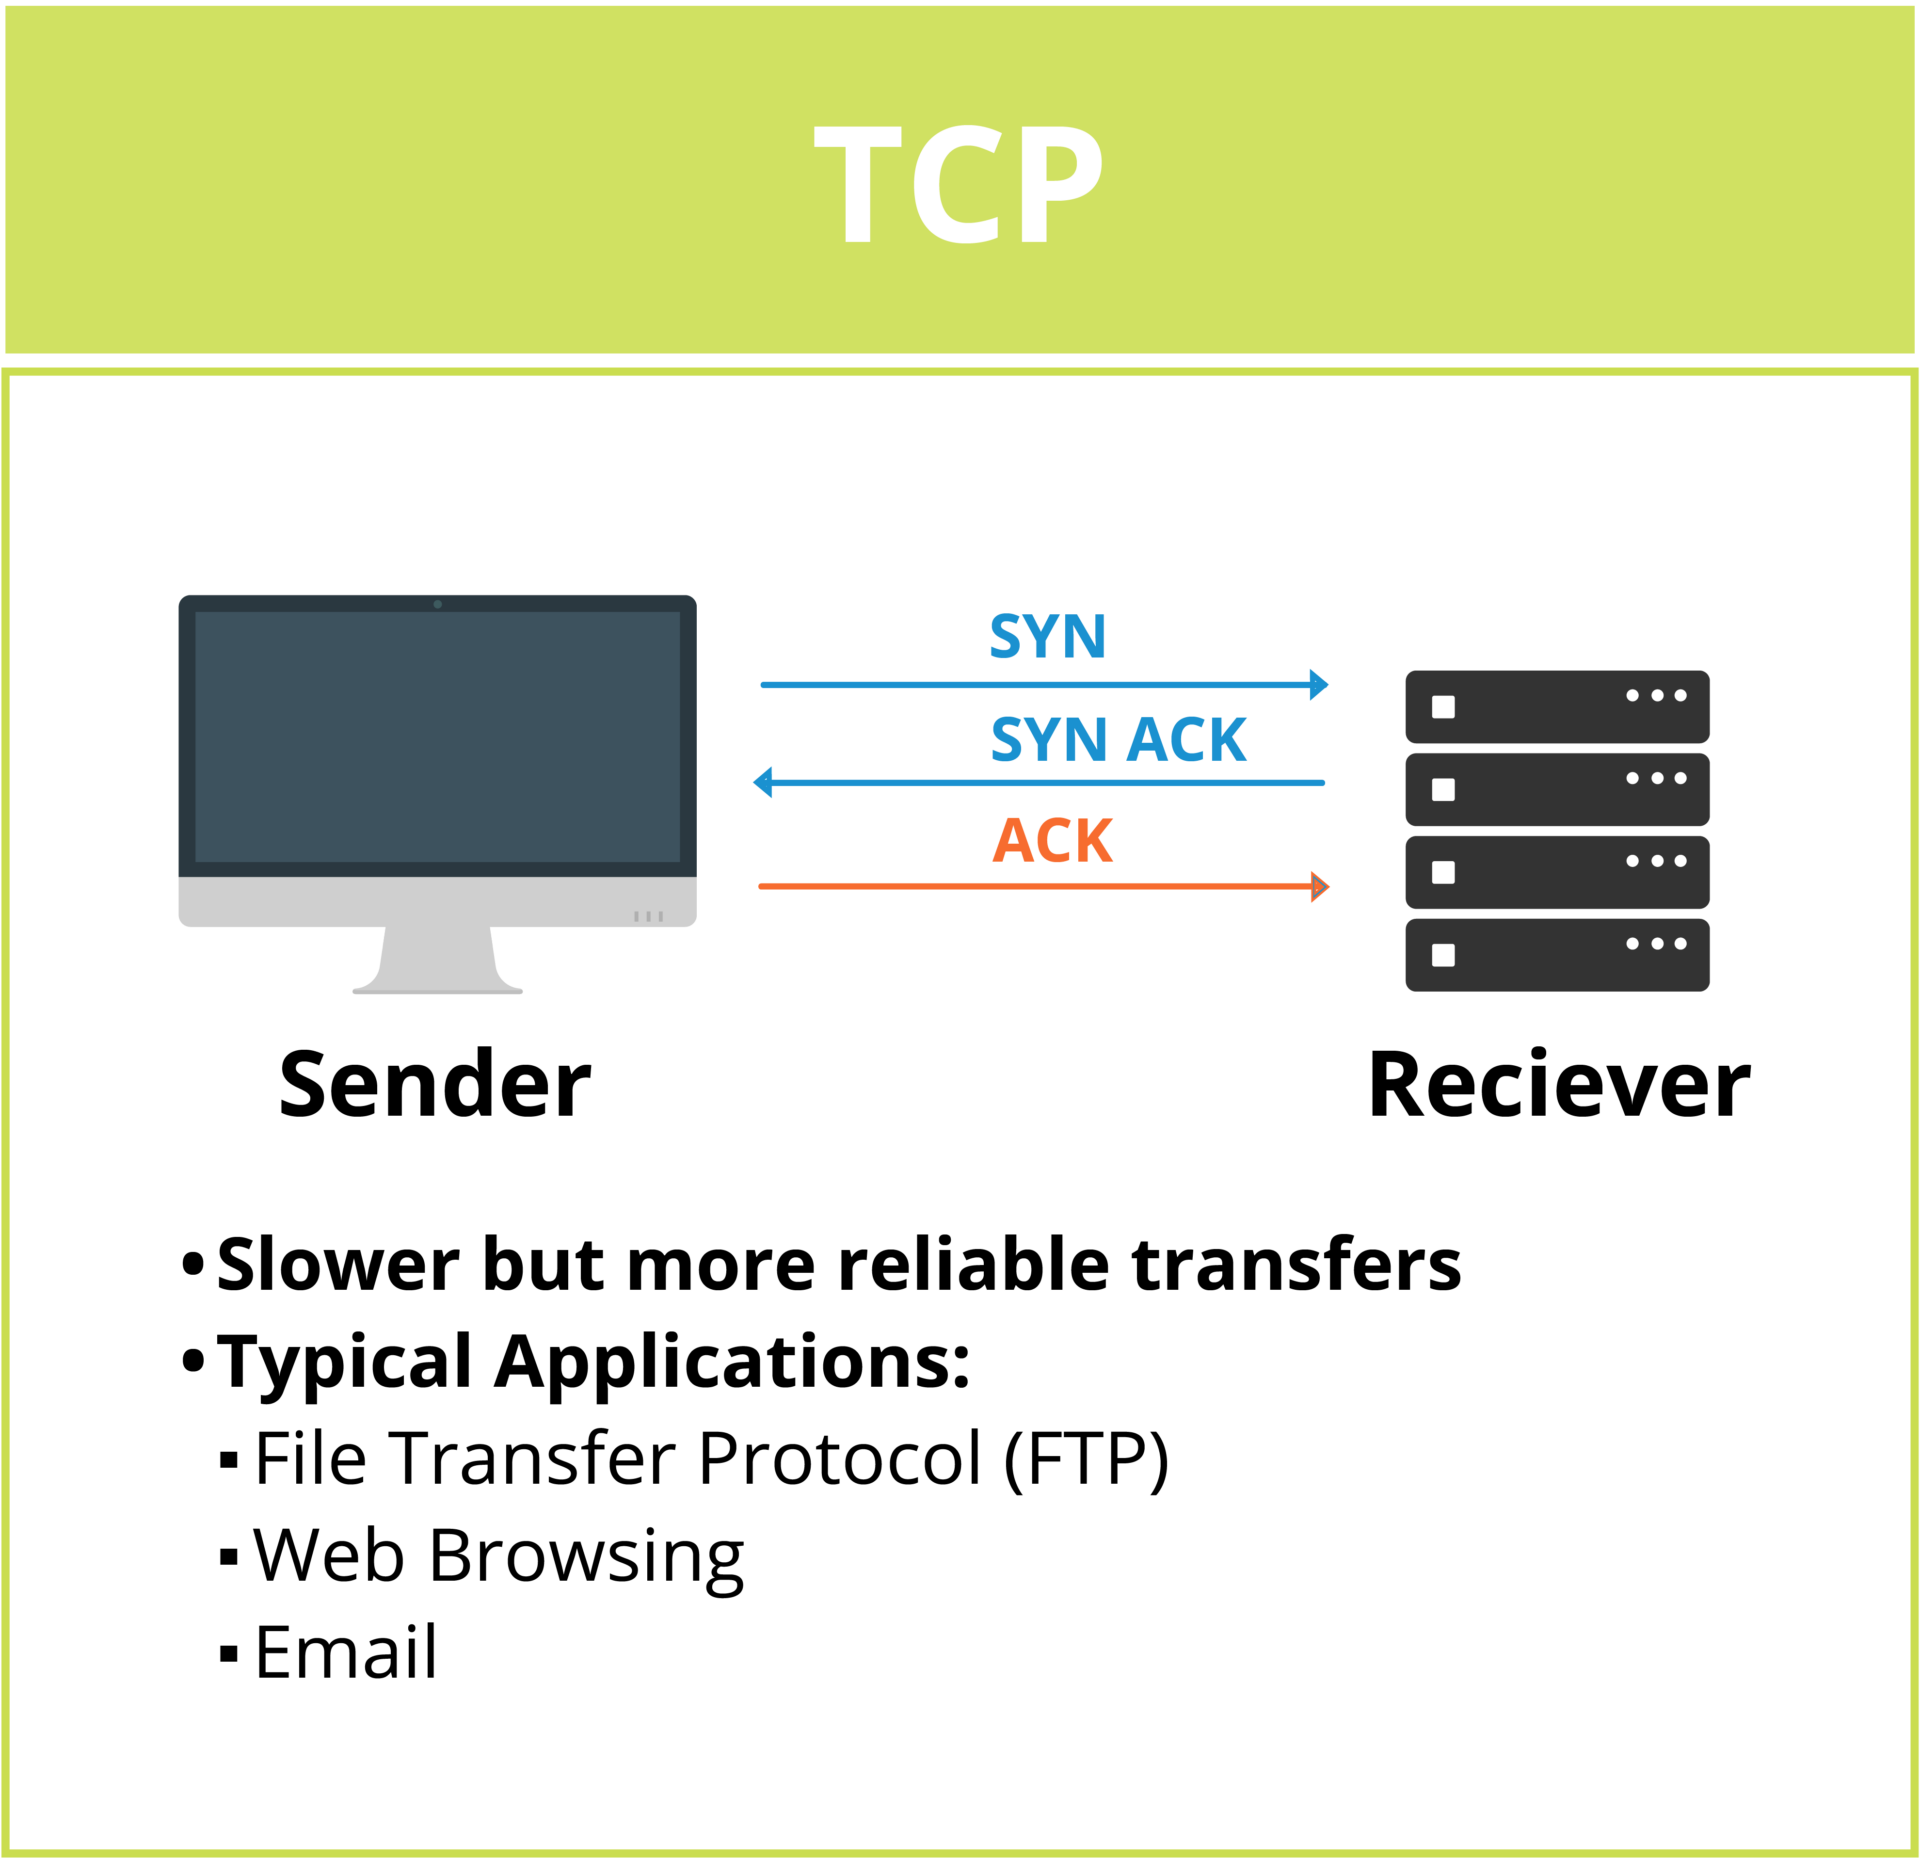 Transmission Control Protocol (TCP) graphic explaining how transfers are slower but more reliable